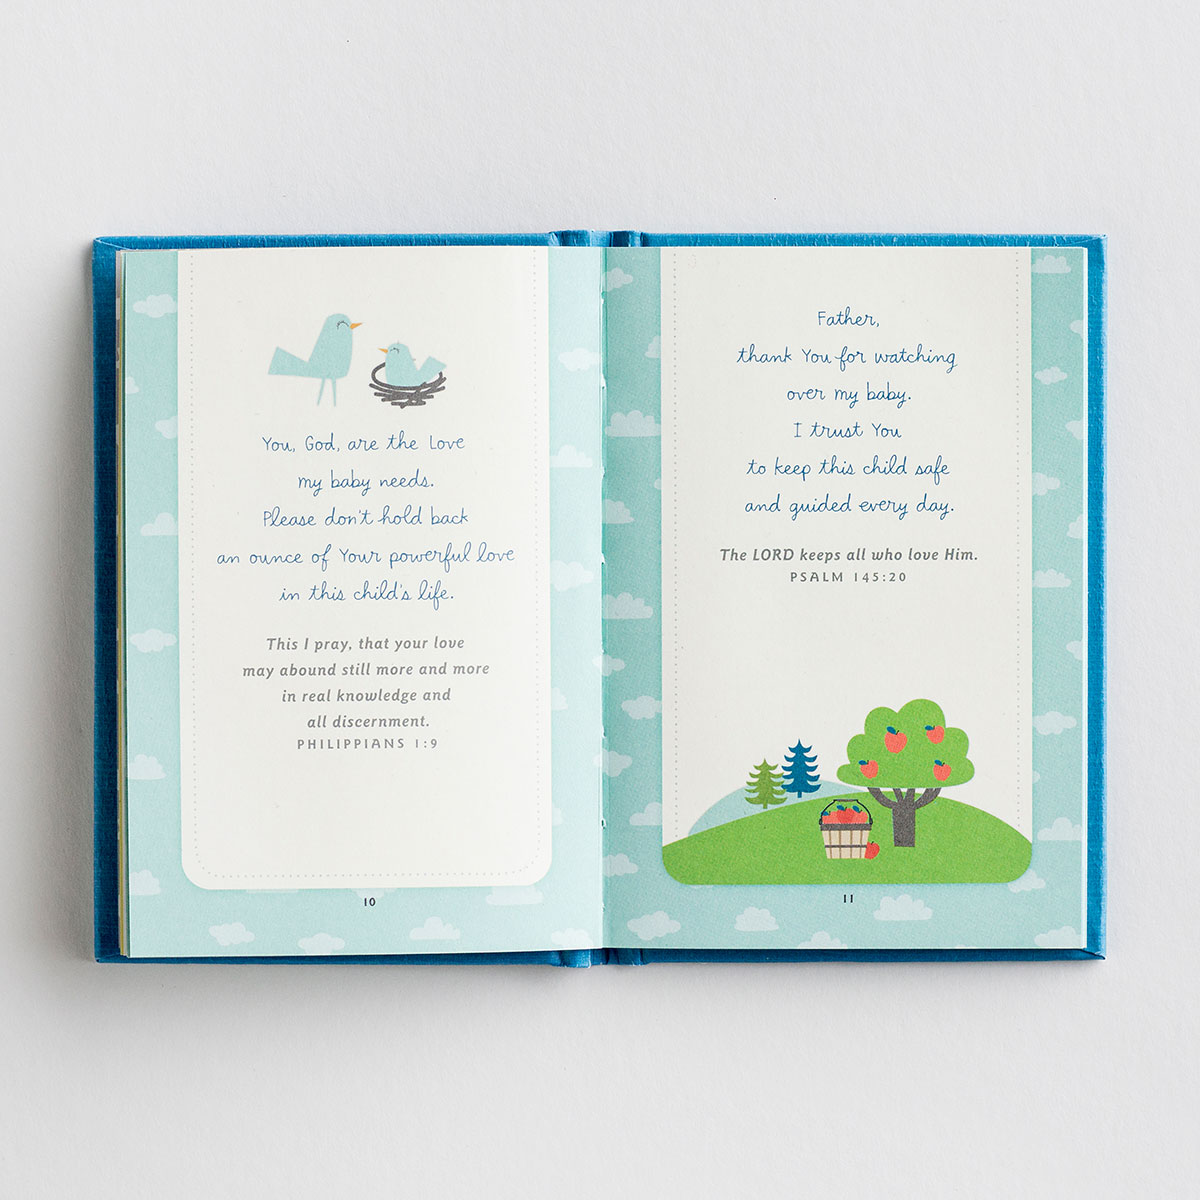 Bedtime Blessings for Your Baby is perfect for a new mom who wants to speak life and truth over her little one. This small book can be kept at arms reach so that you can read beautiful and comforting prayers over your most precious gift from God.